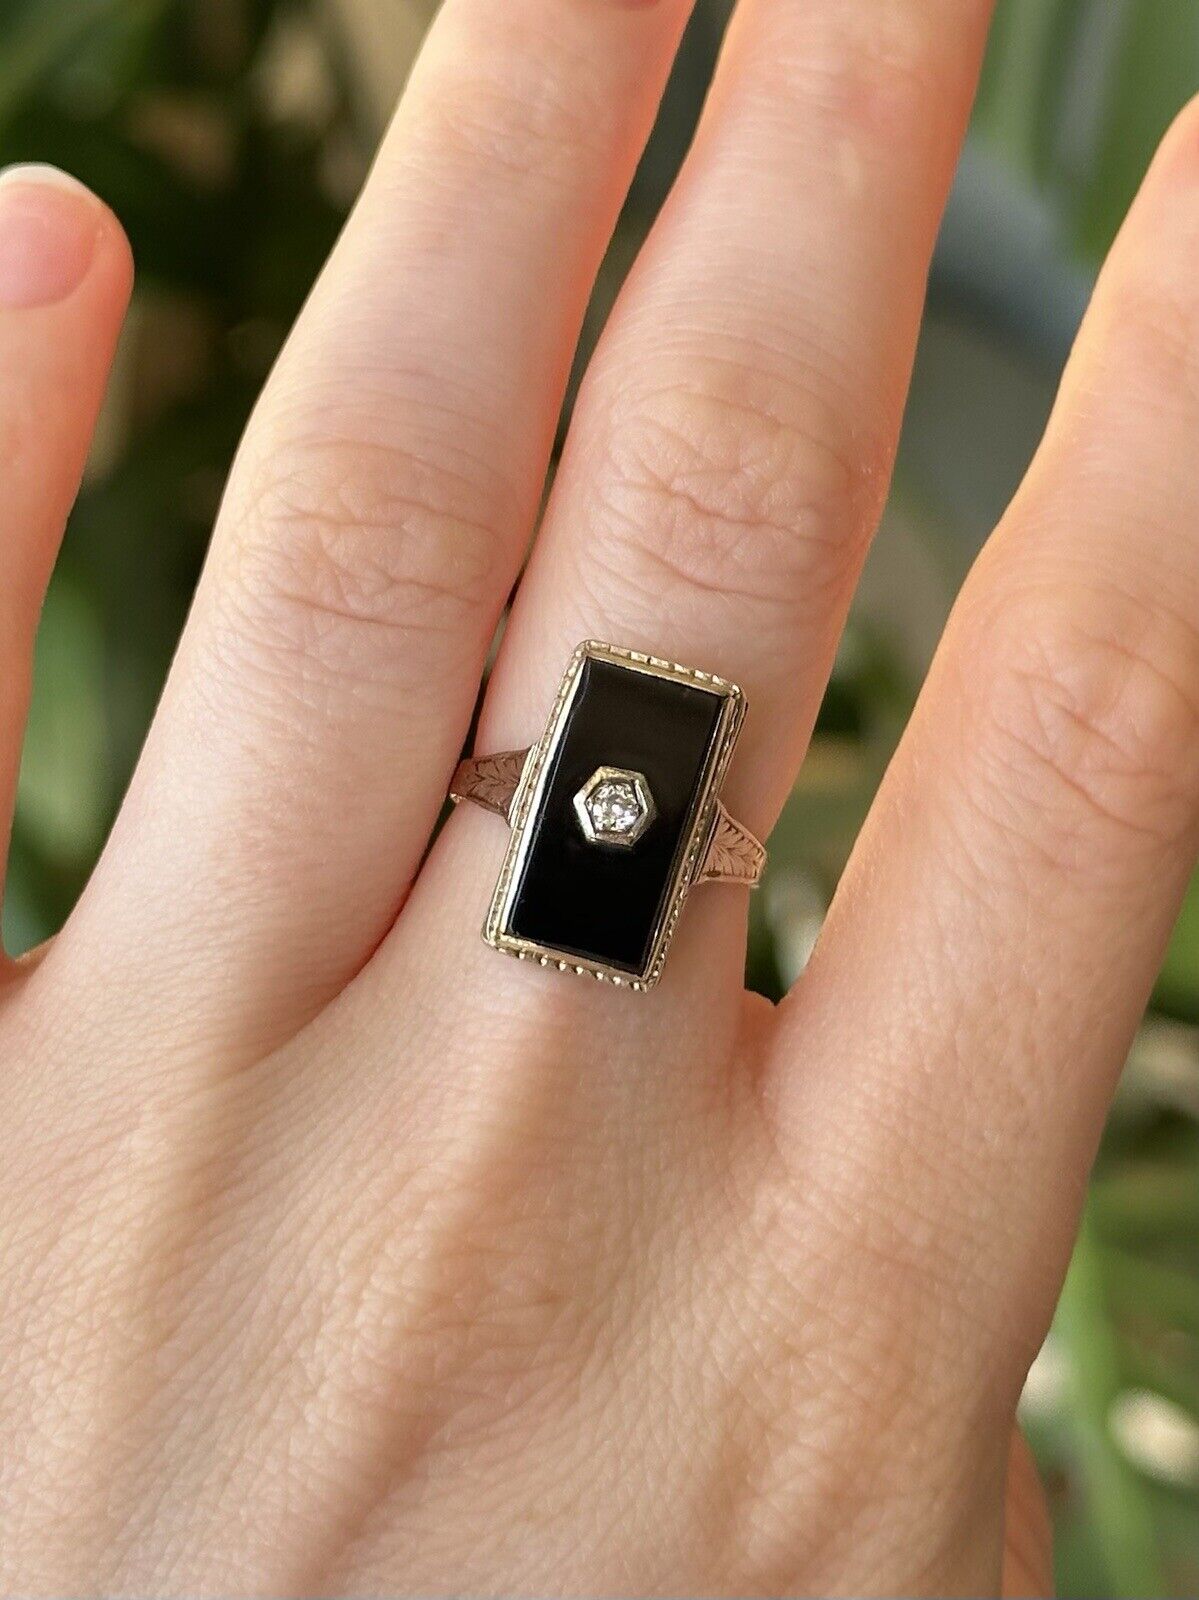 14k solid white gold circa 1930’s art deco onyx and diamond ring size 6.25